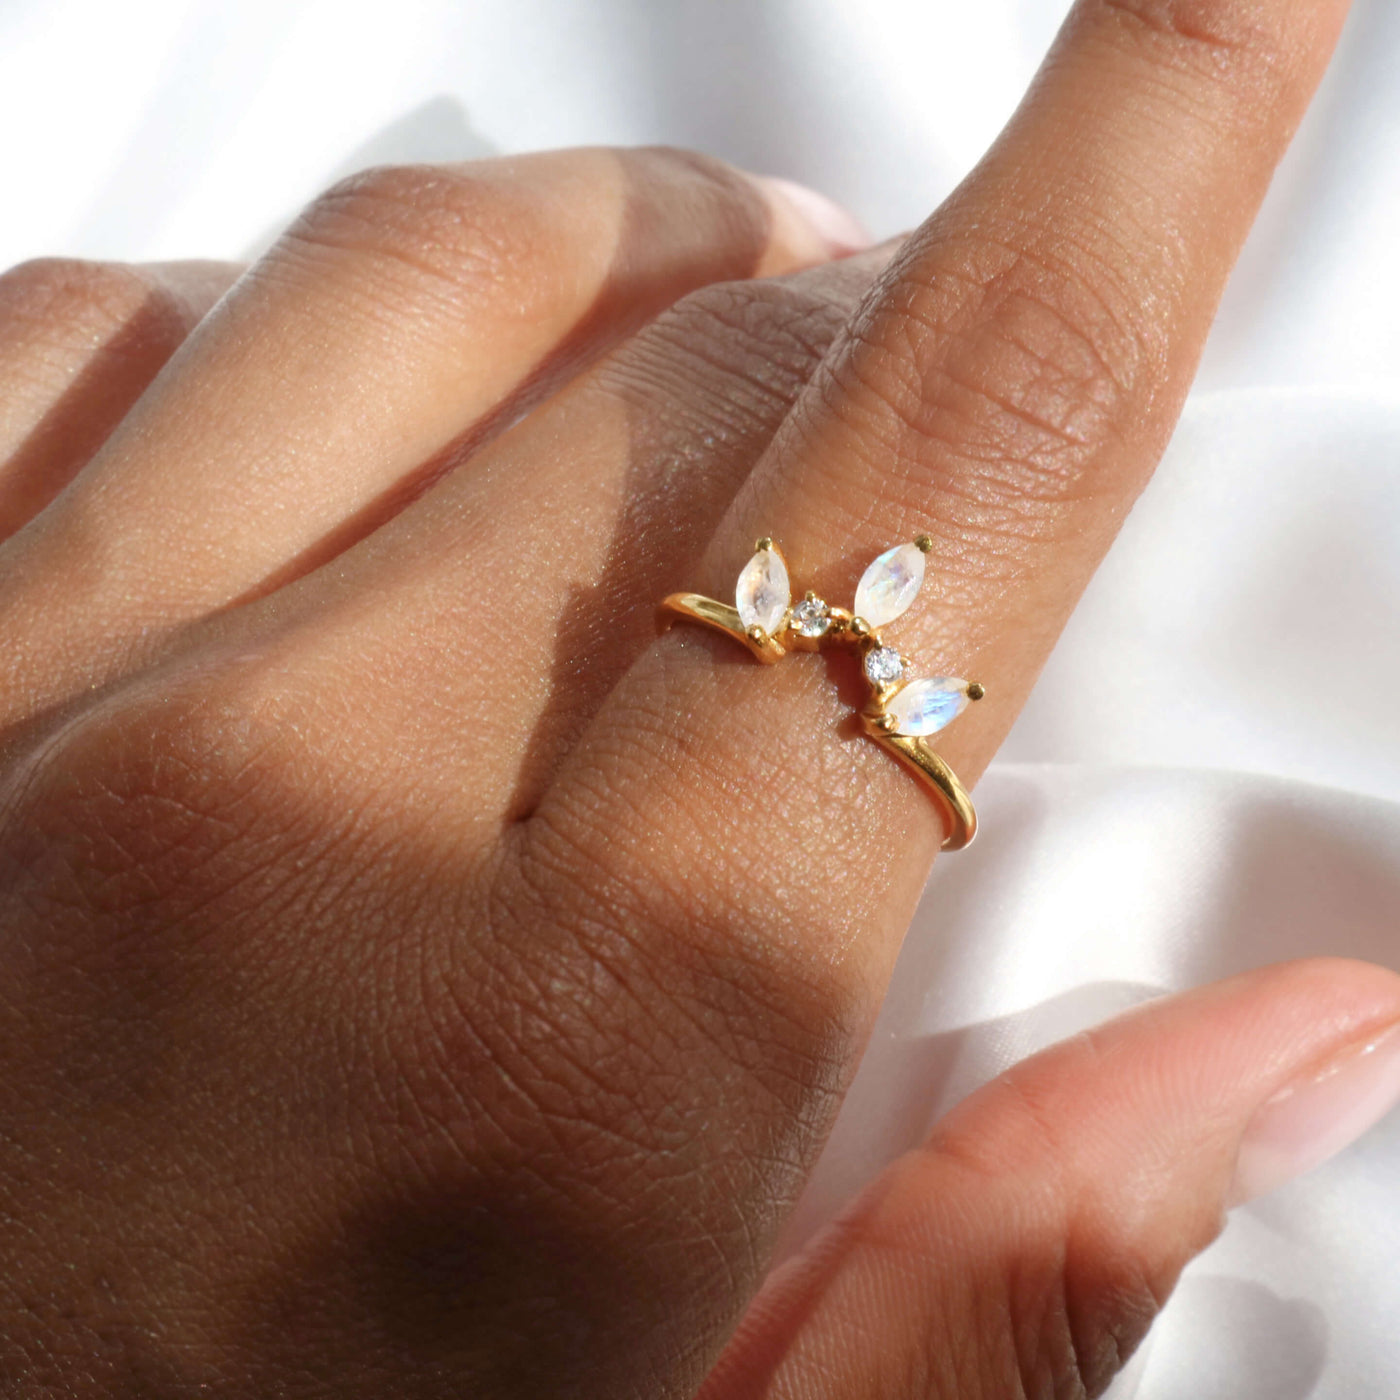 Moonstone crown ring with 2 cubic zirconia stones & 18k gold-plated band.